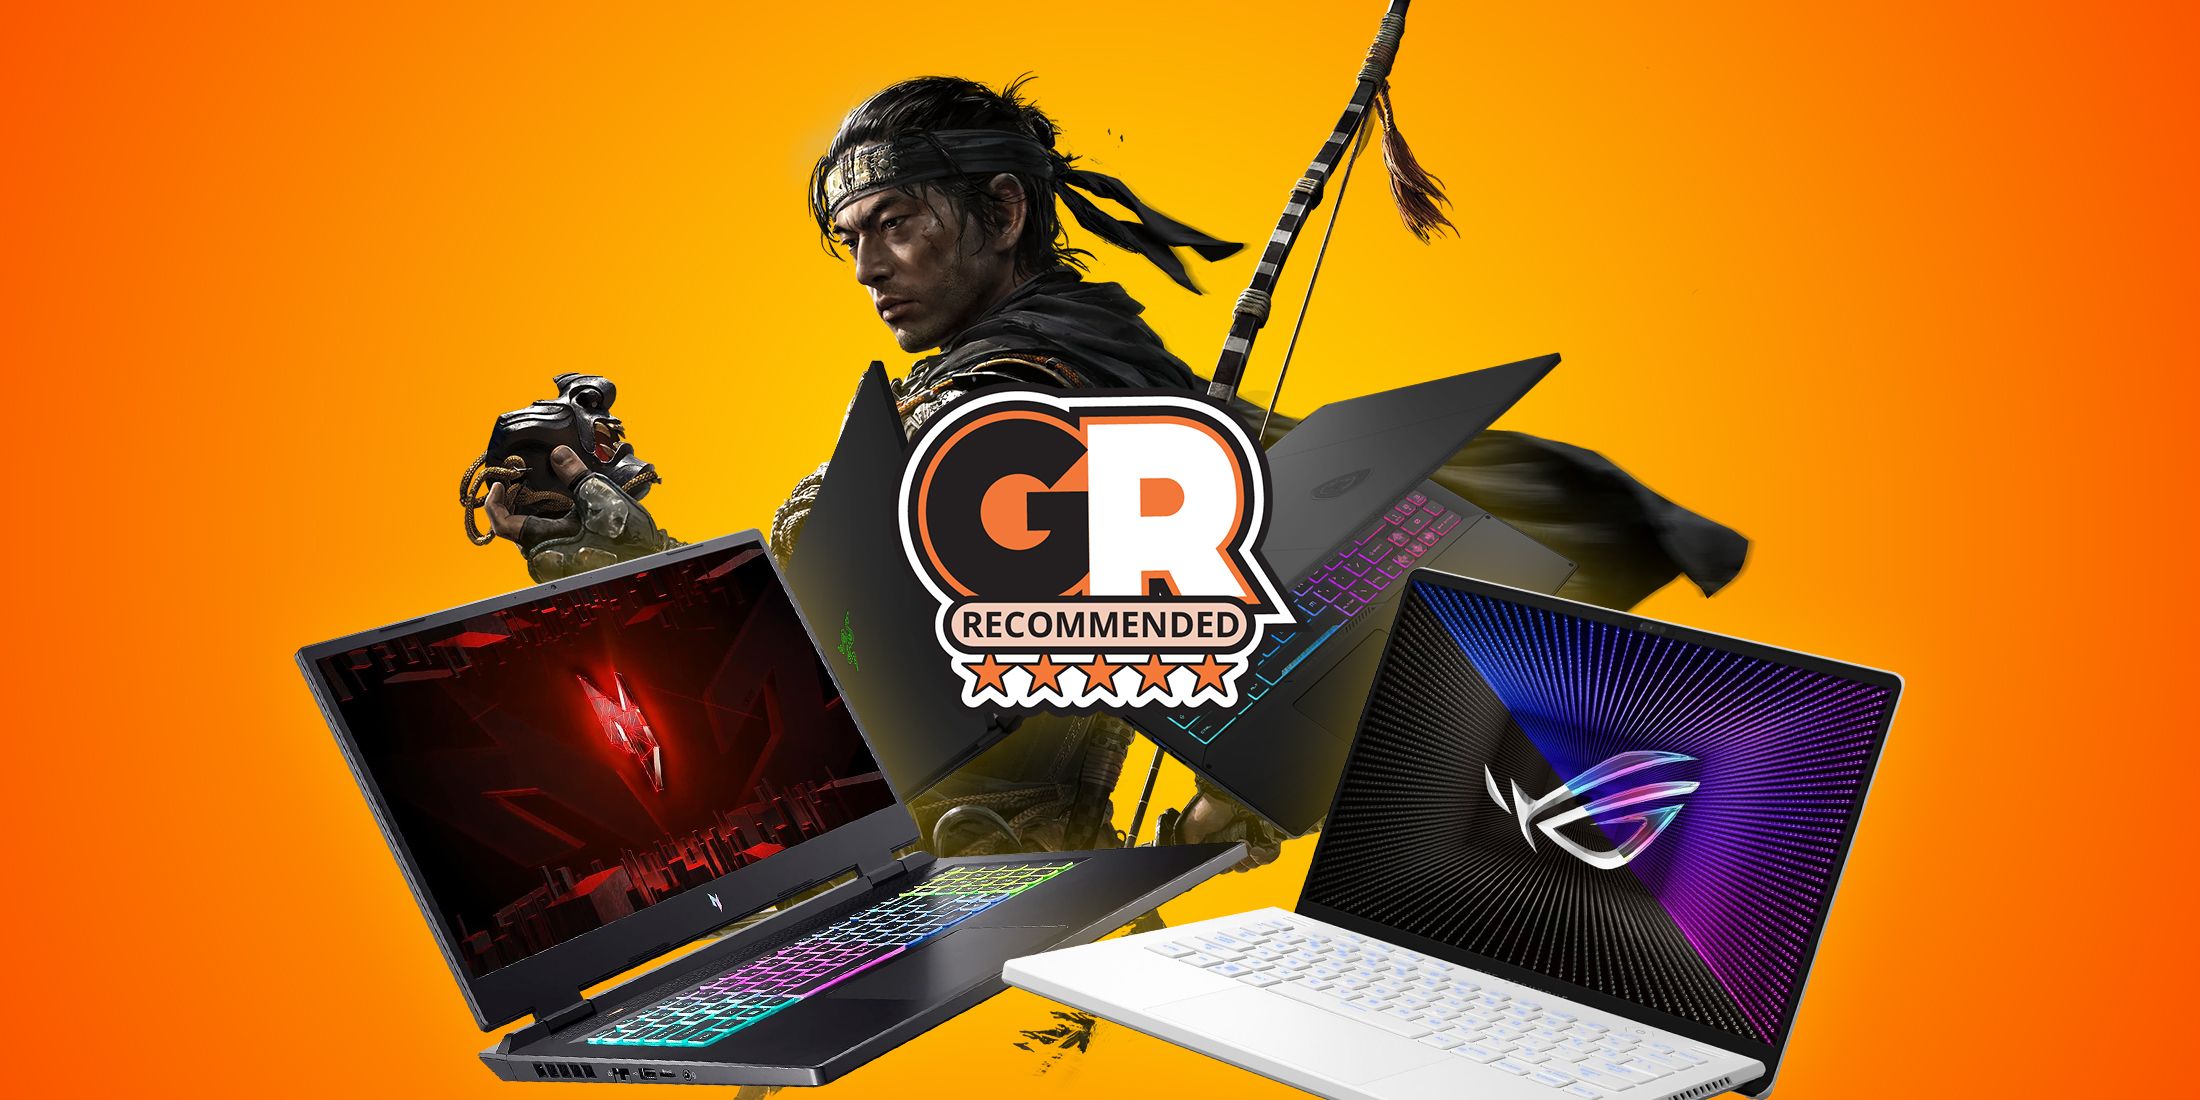 The Best Gaming Laptops To Play Ghost of Tsushima